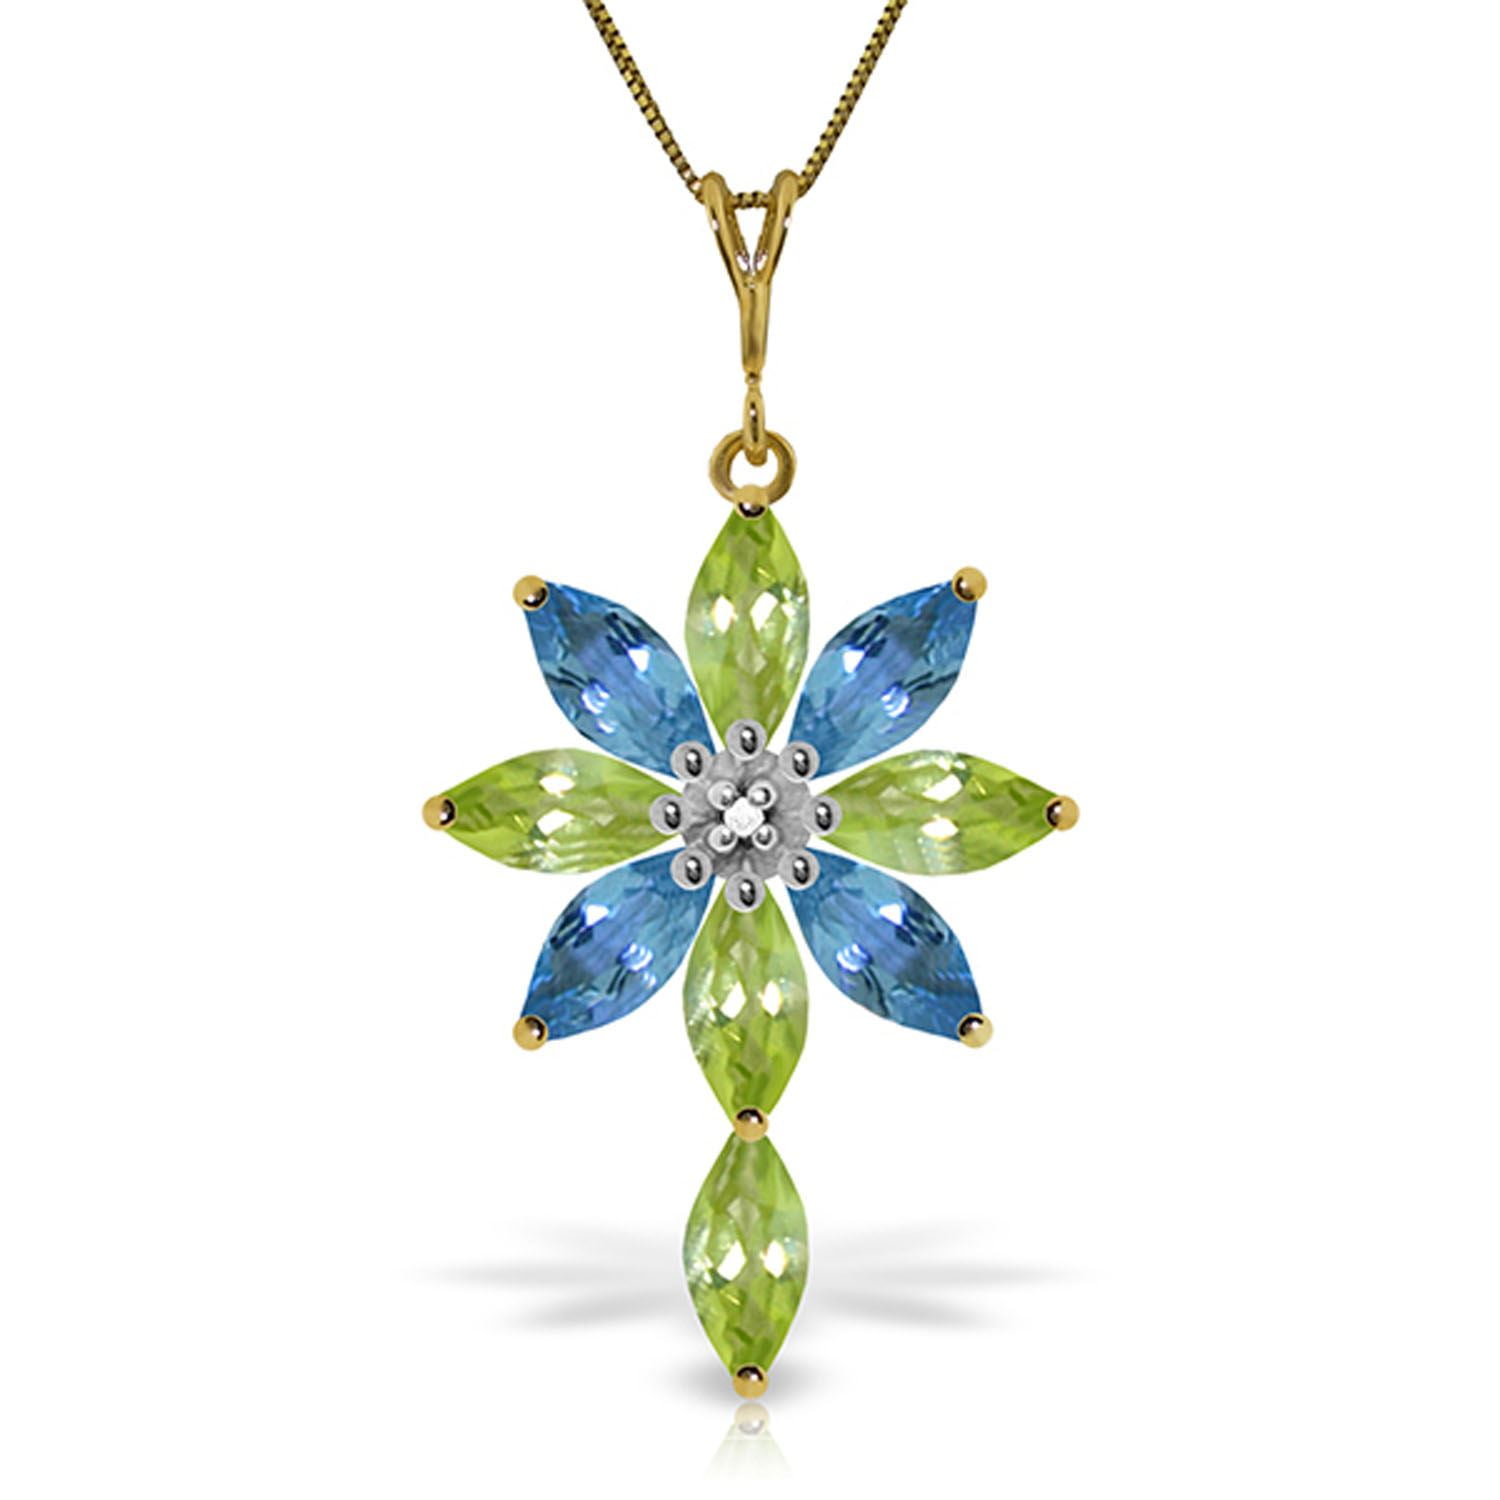 ALARRI 1.06 Carat 14K Solid White Gold Flower Necklace Citrine Peridot with 20 Inch Chain Length